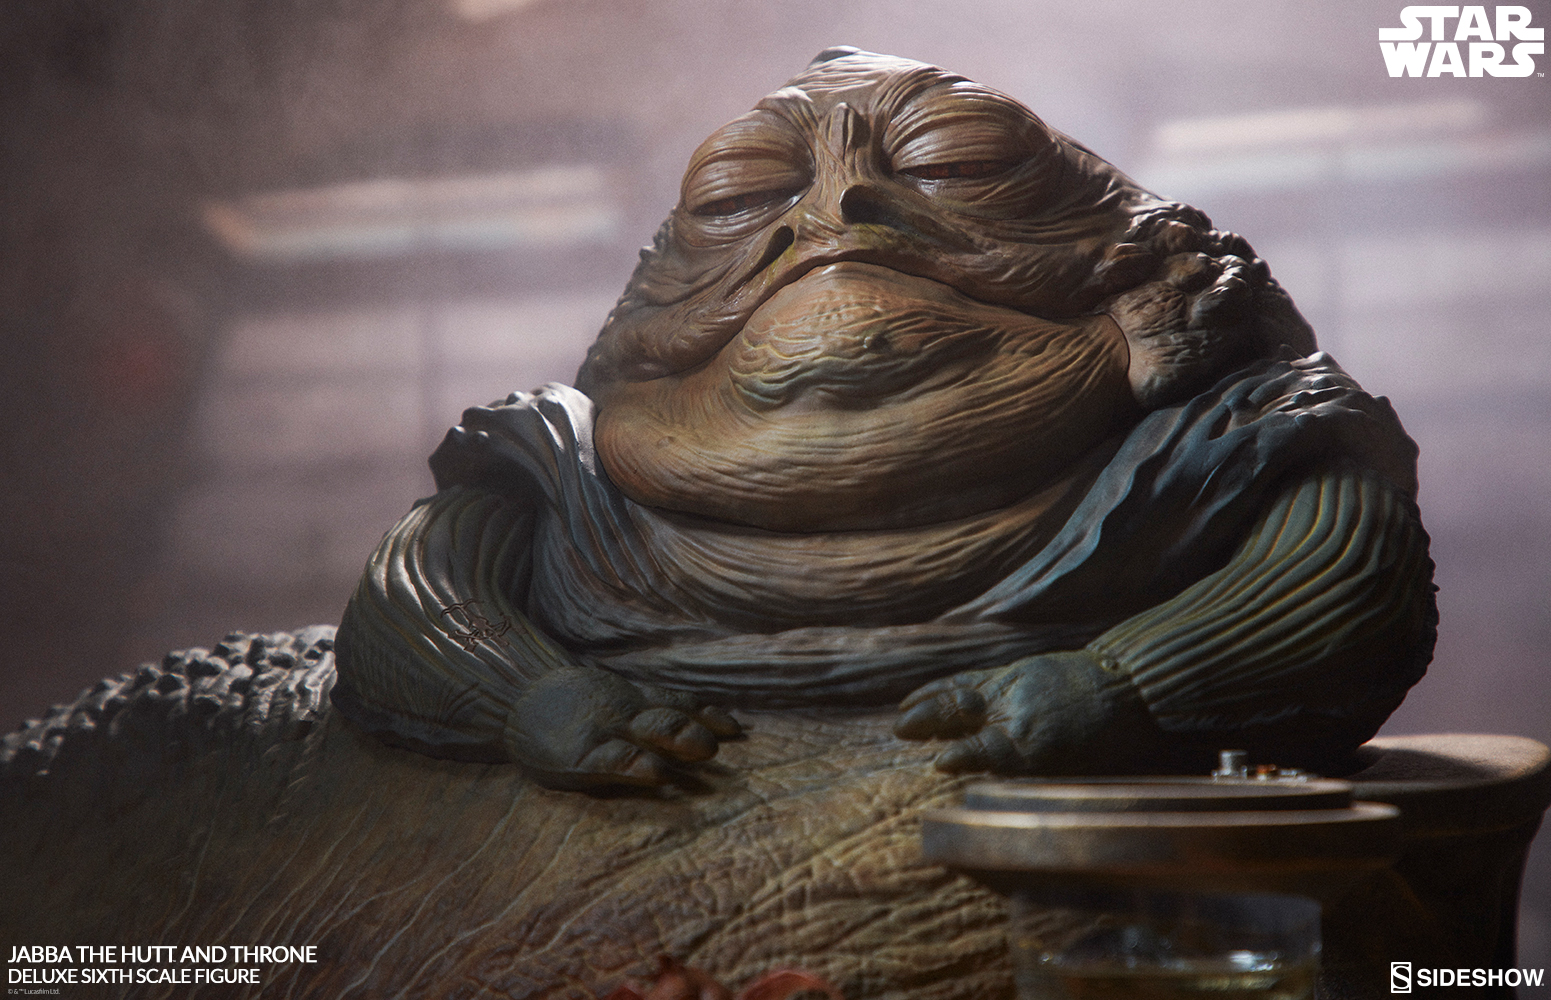 Star Wars Episode VI : Jabba the Hutt and throne - Deluxe Figure (Sideshow) IQFfABx2_o